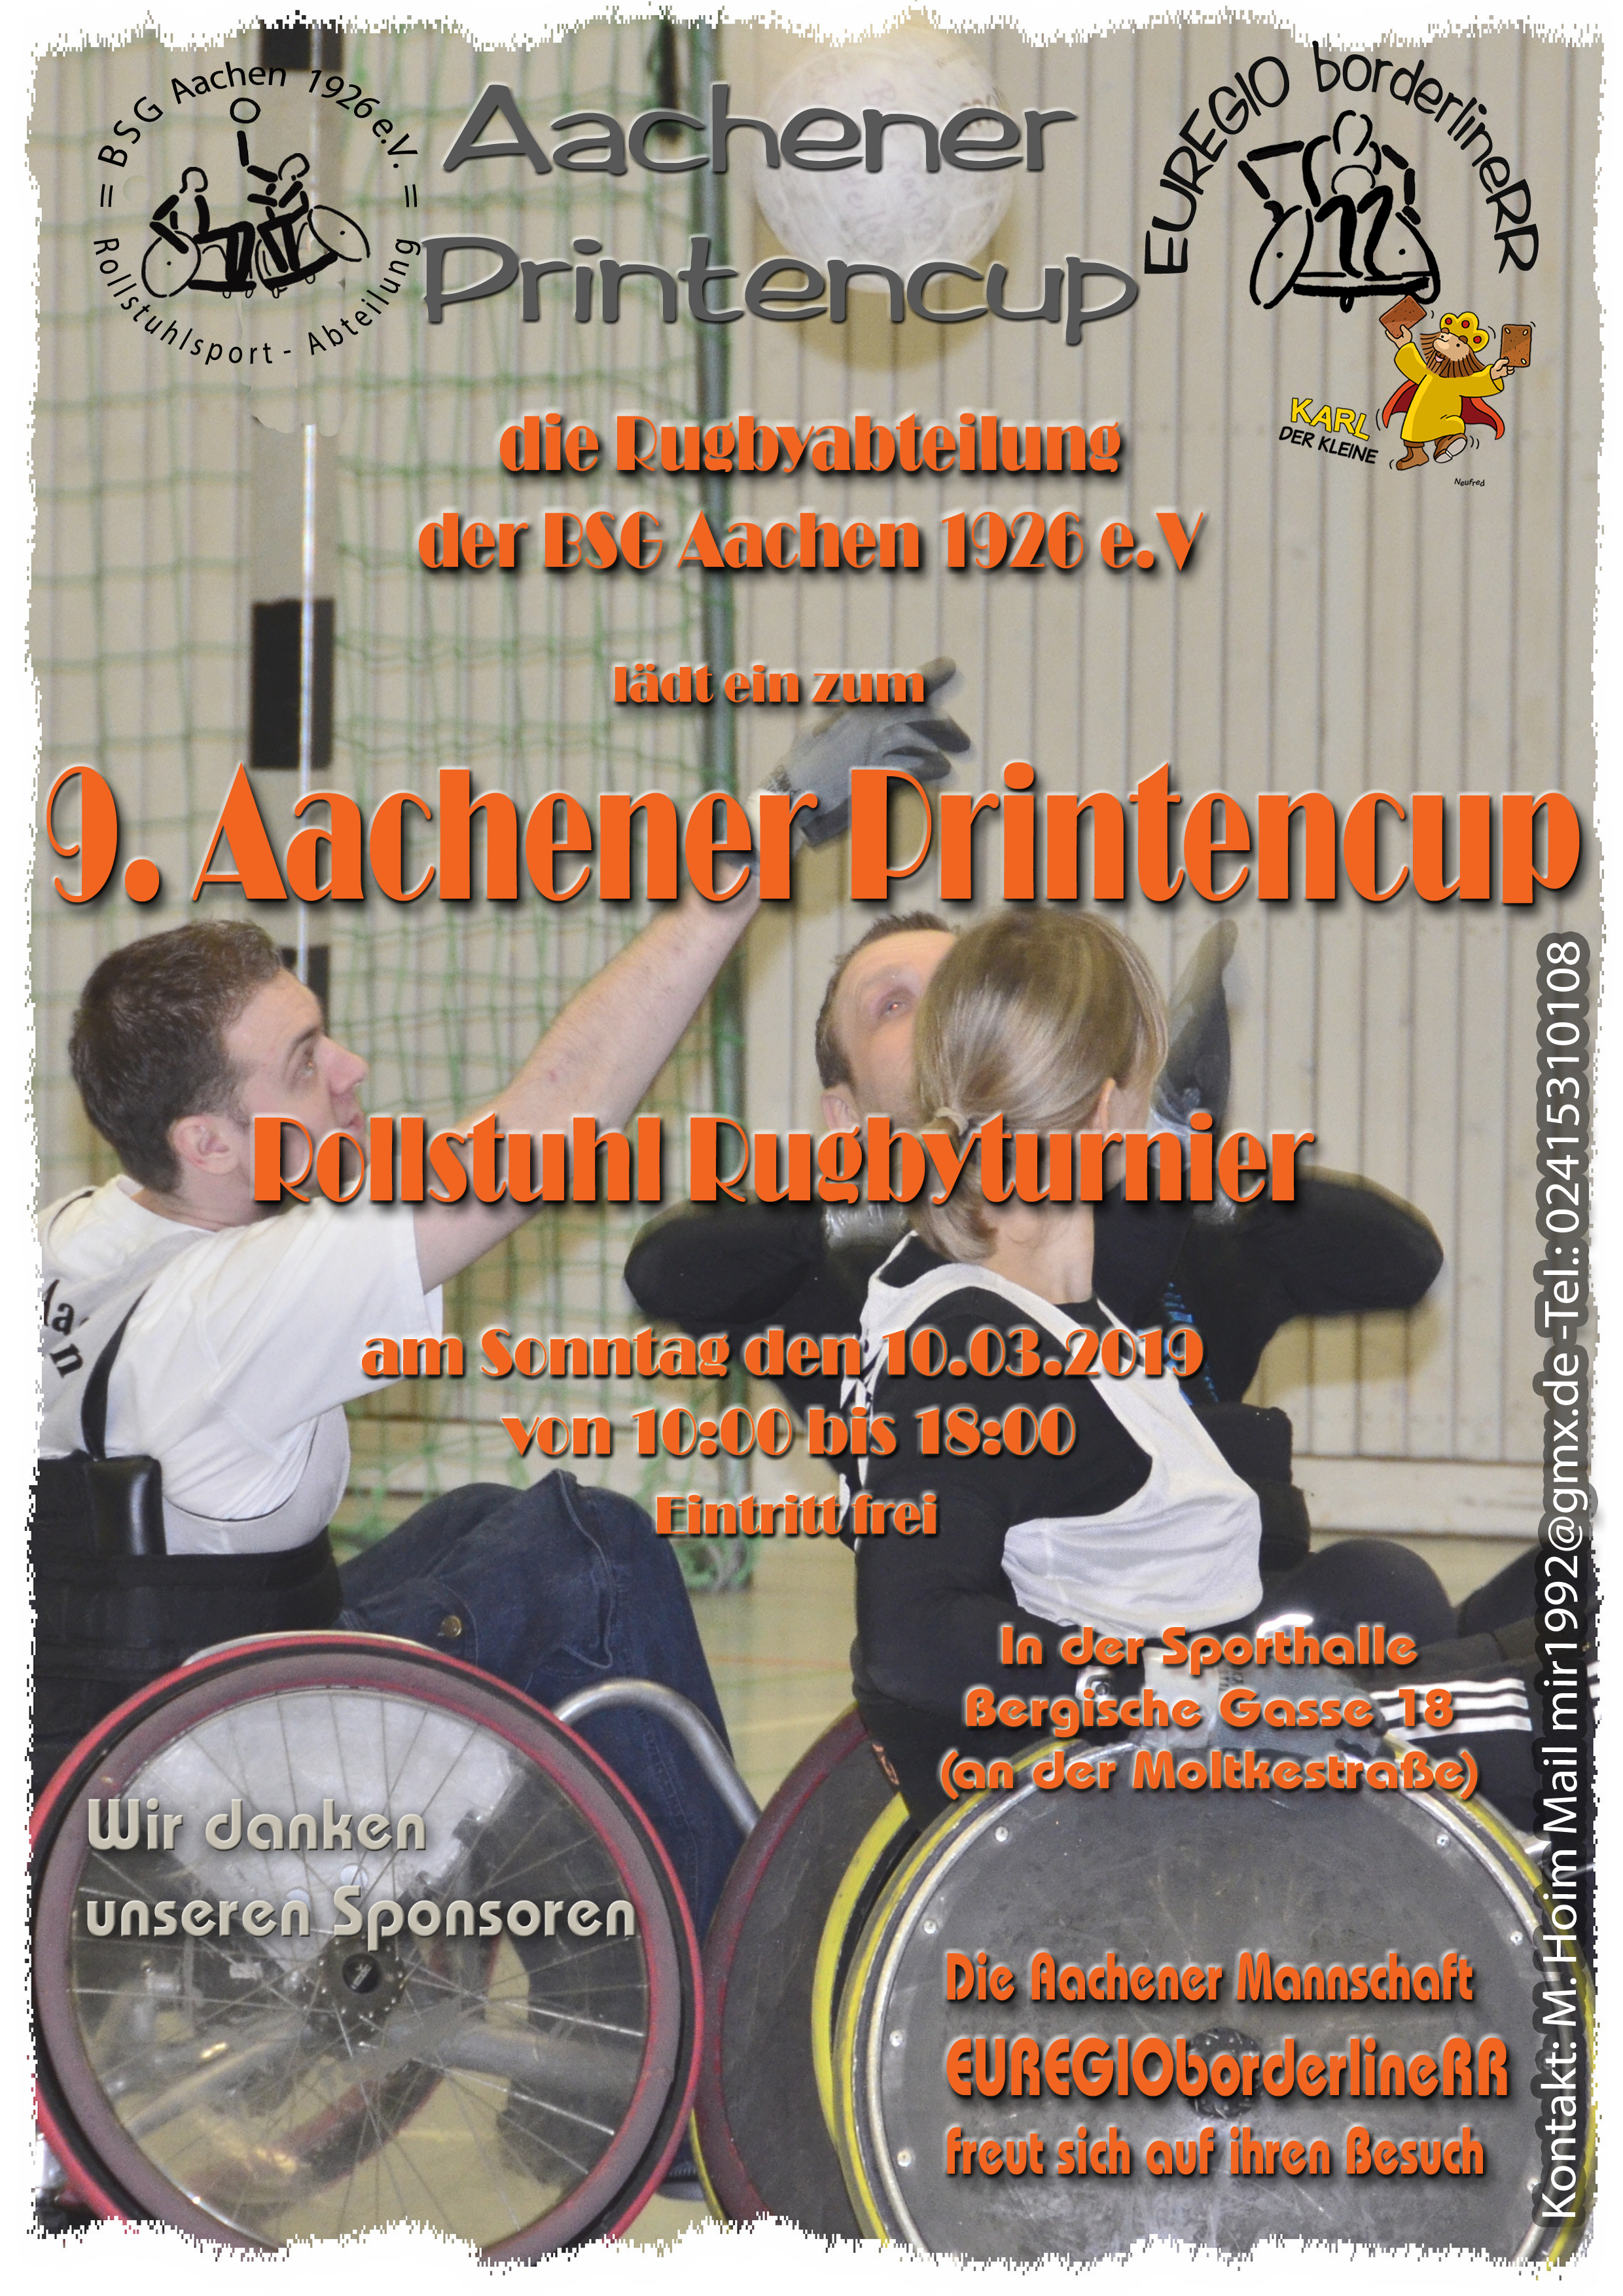 9. Printencup in Aachen